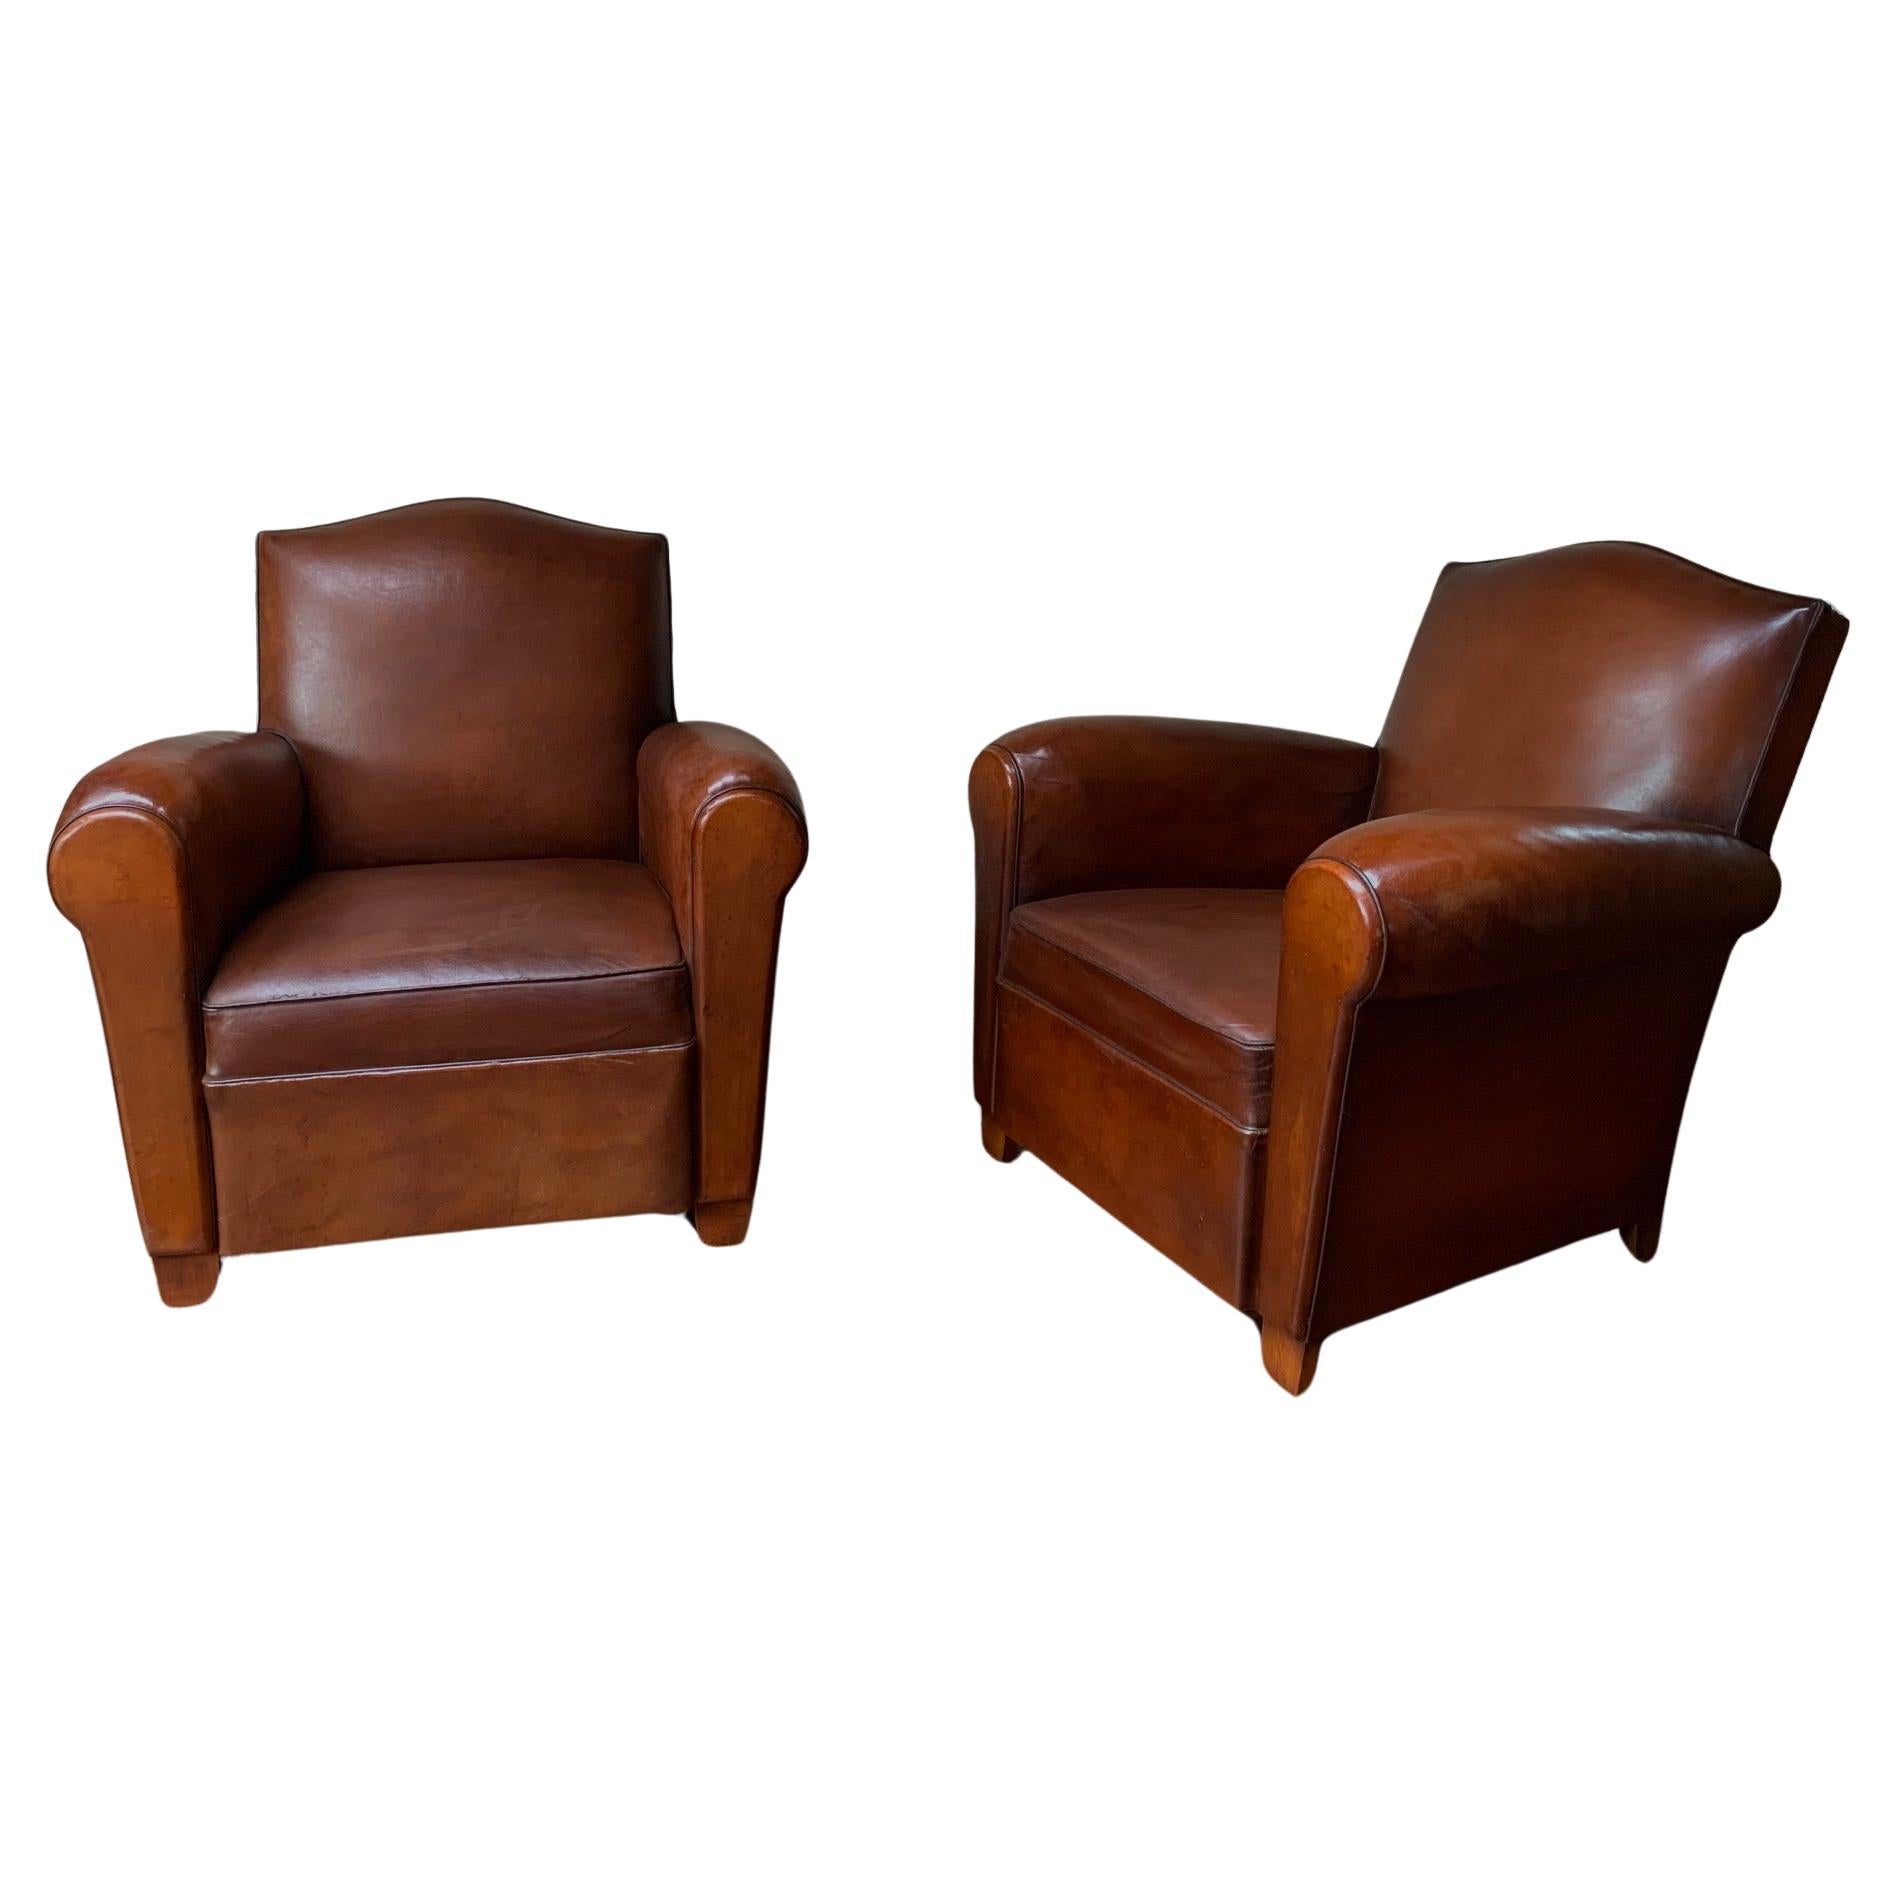 A Wonderful Pair of French Leather Club Chairs Chapeau du Gendarme Models, C1950 For Sale